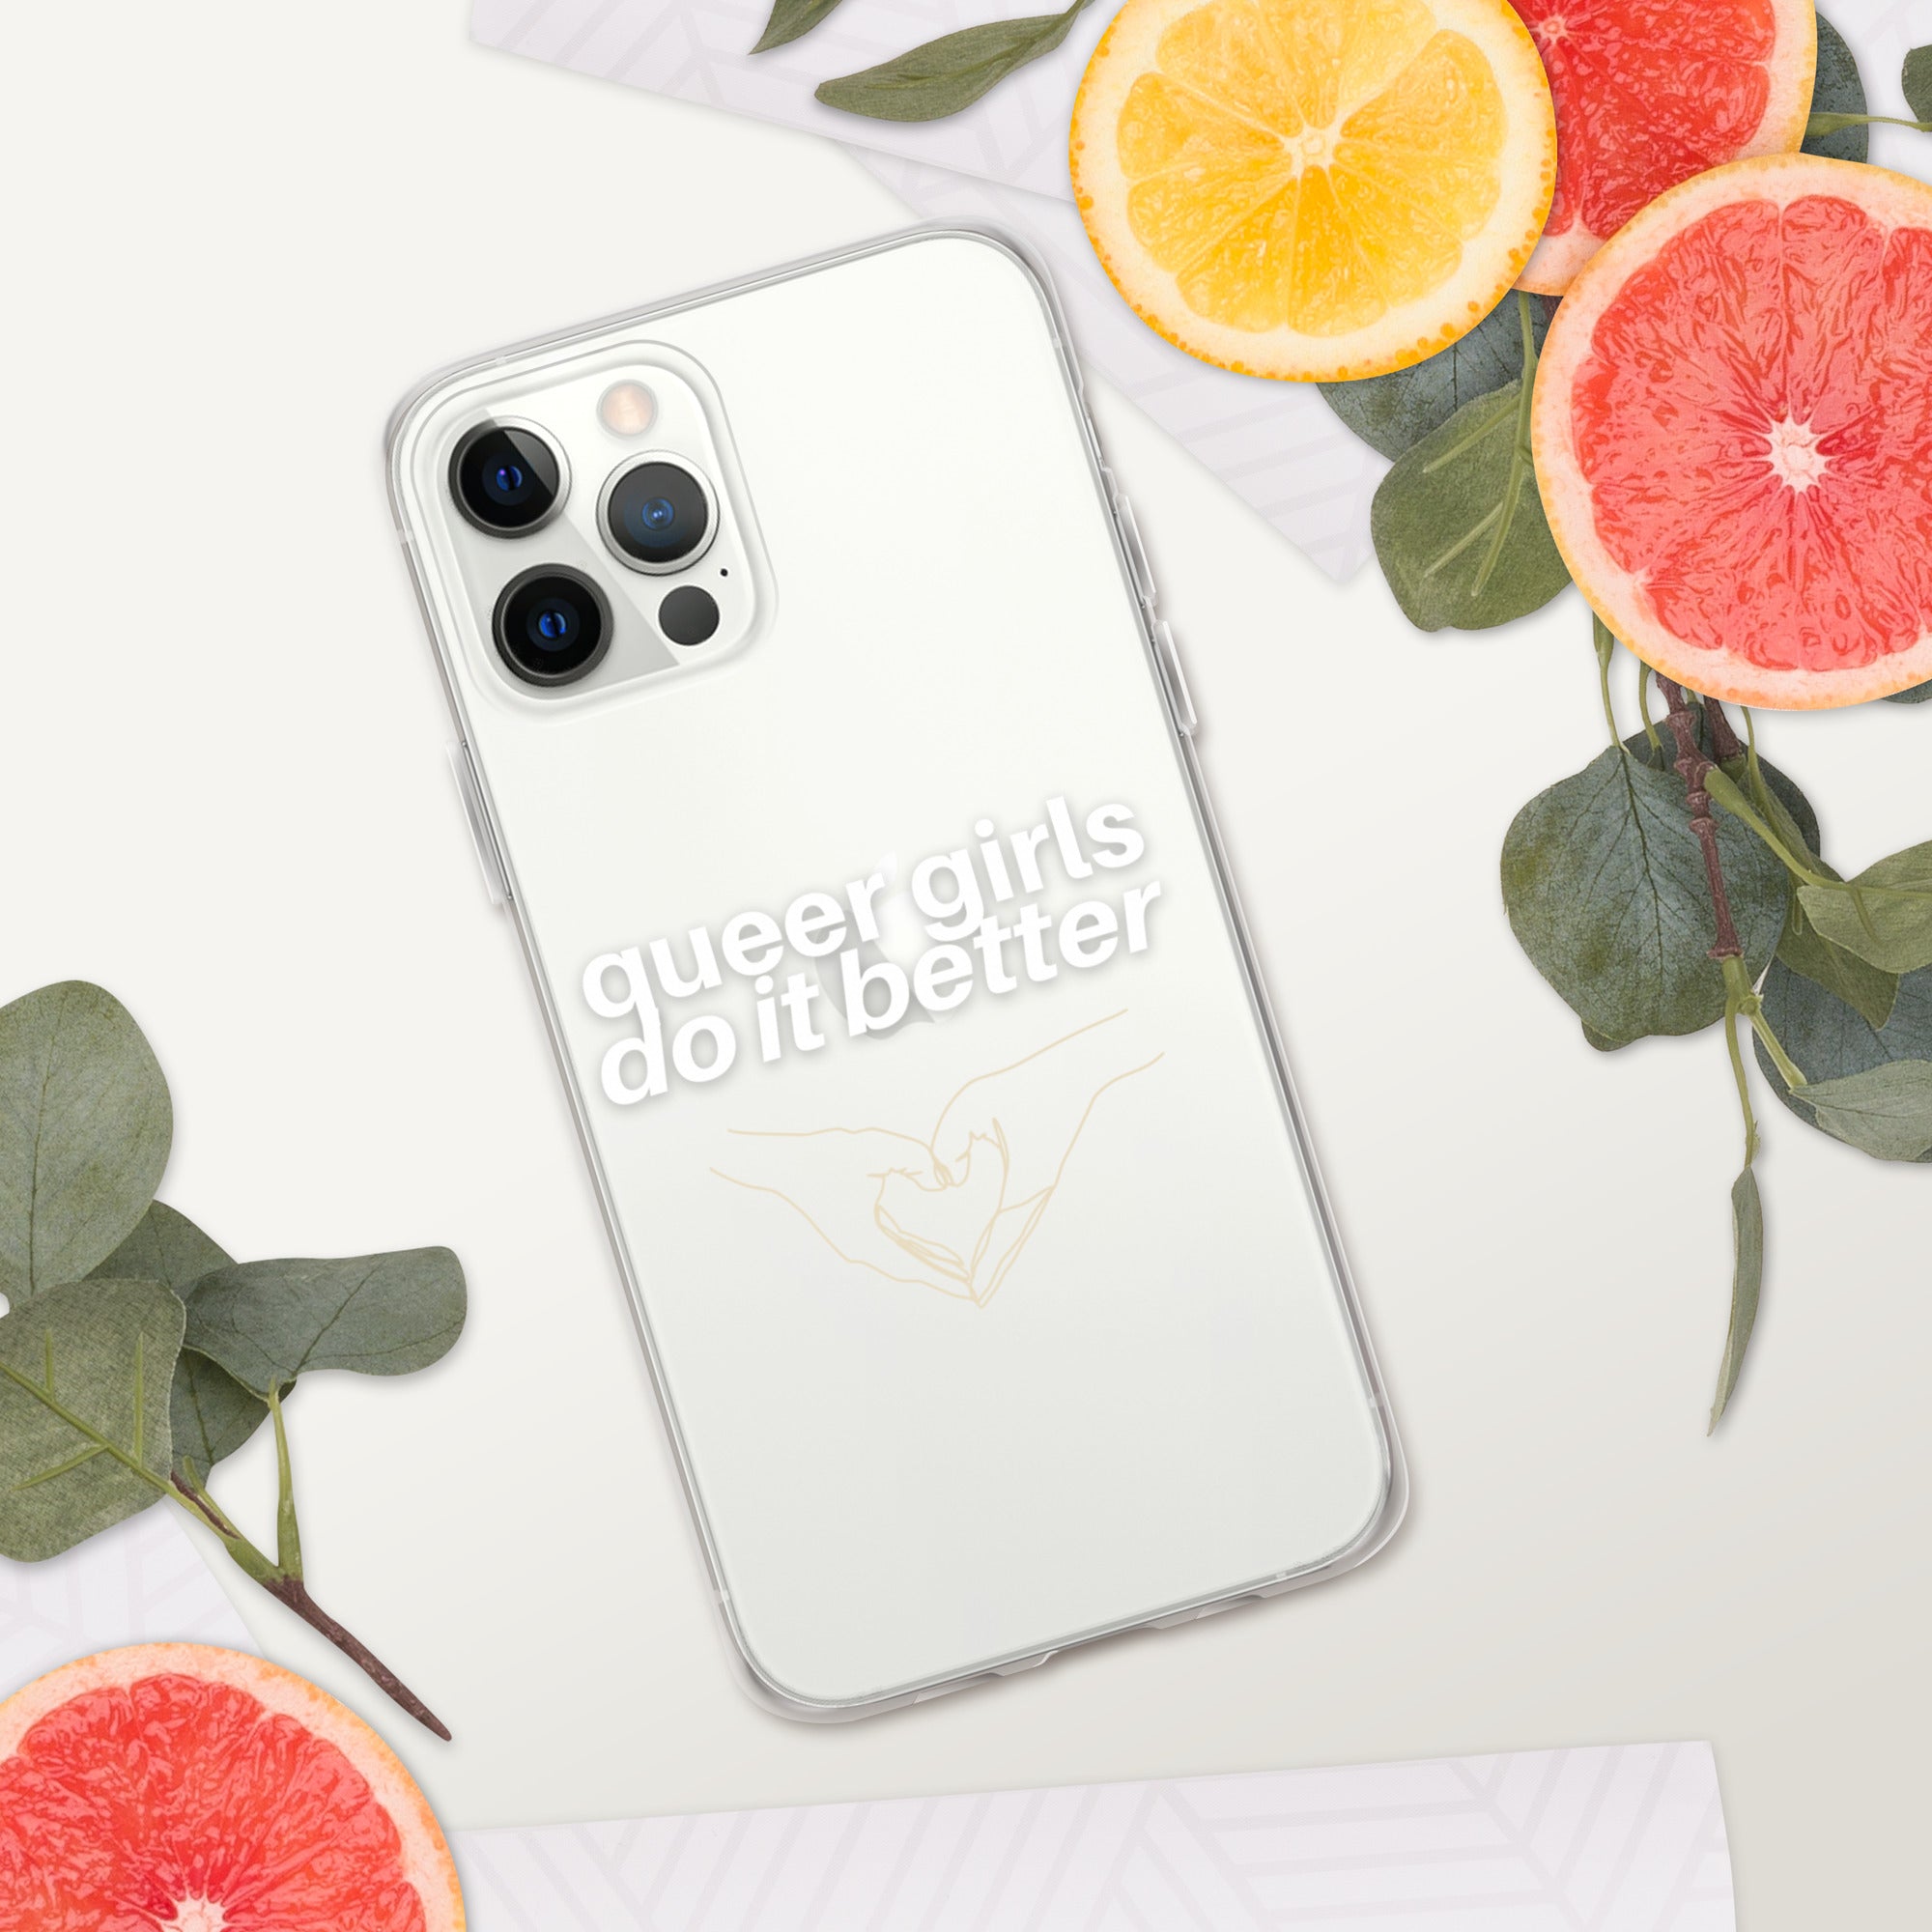 Queer Girls Do It Better Clear Case for iPhone®